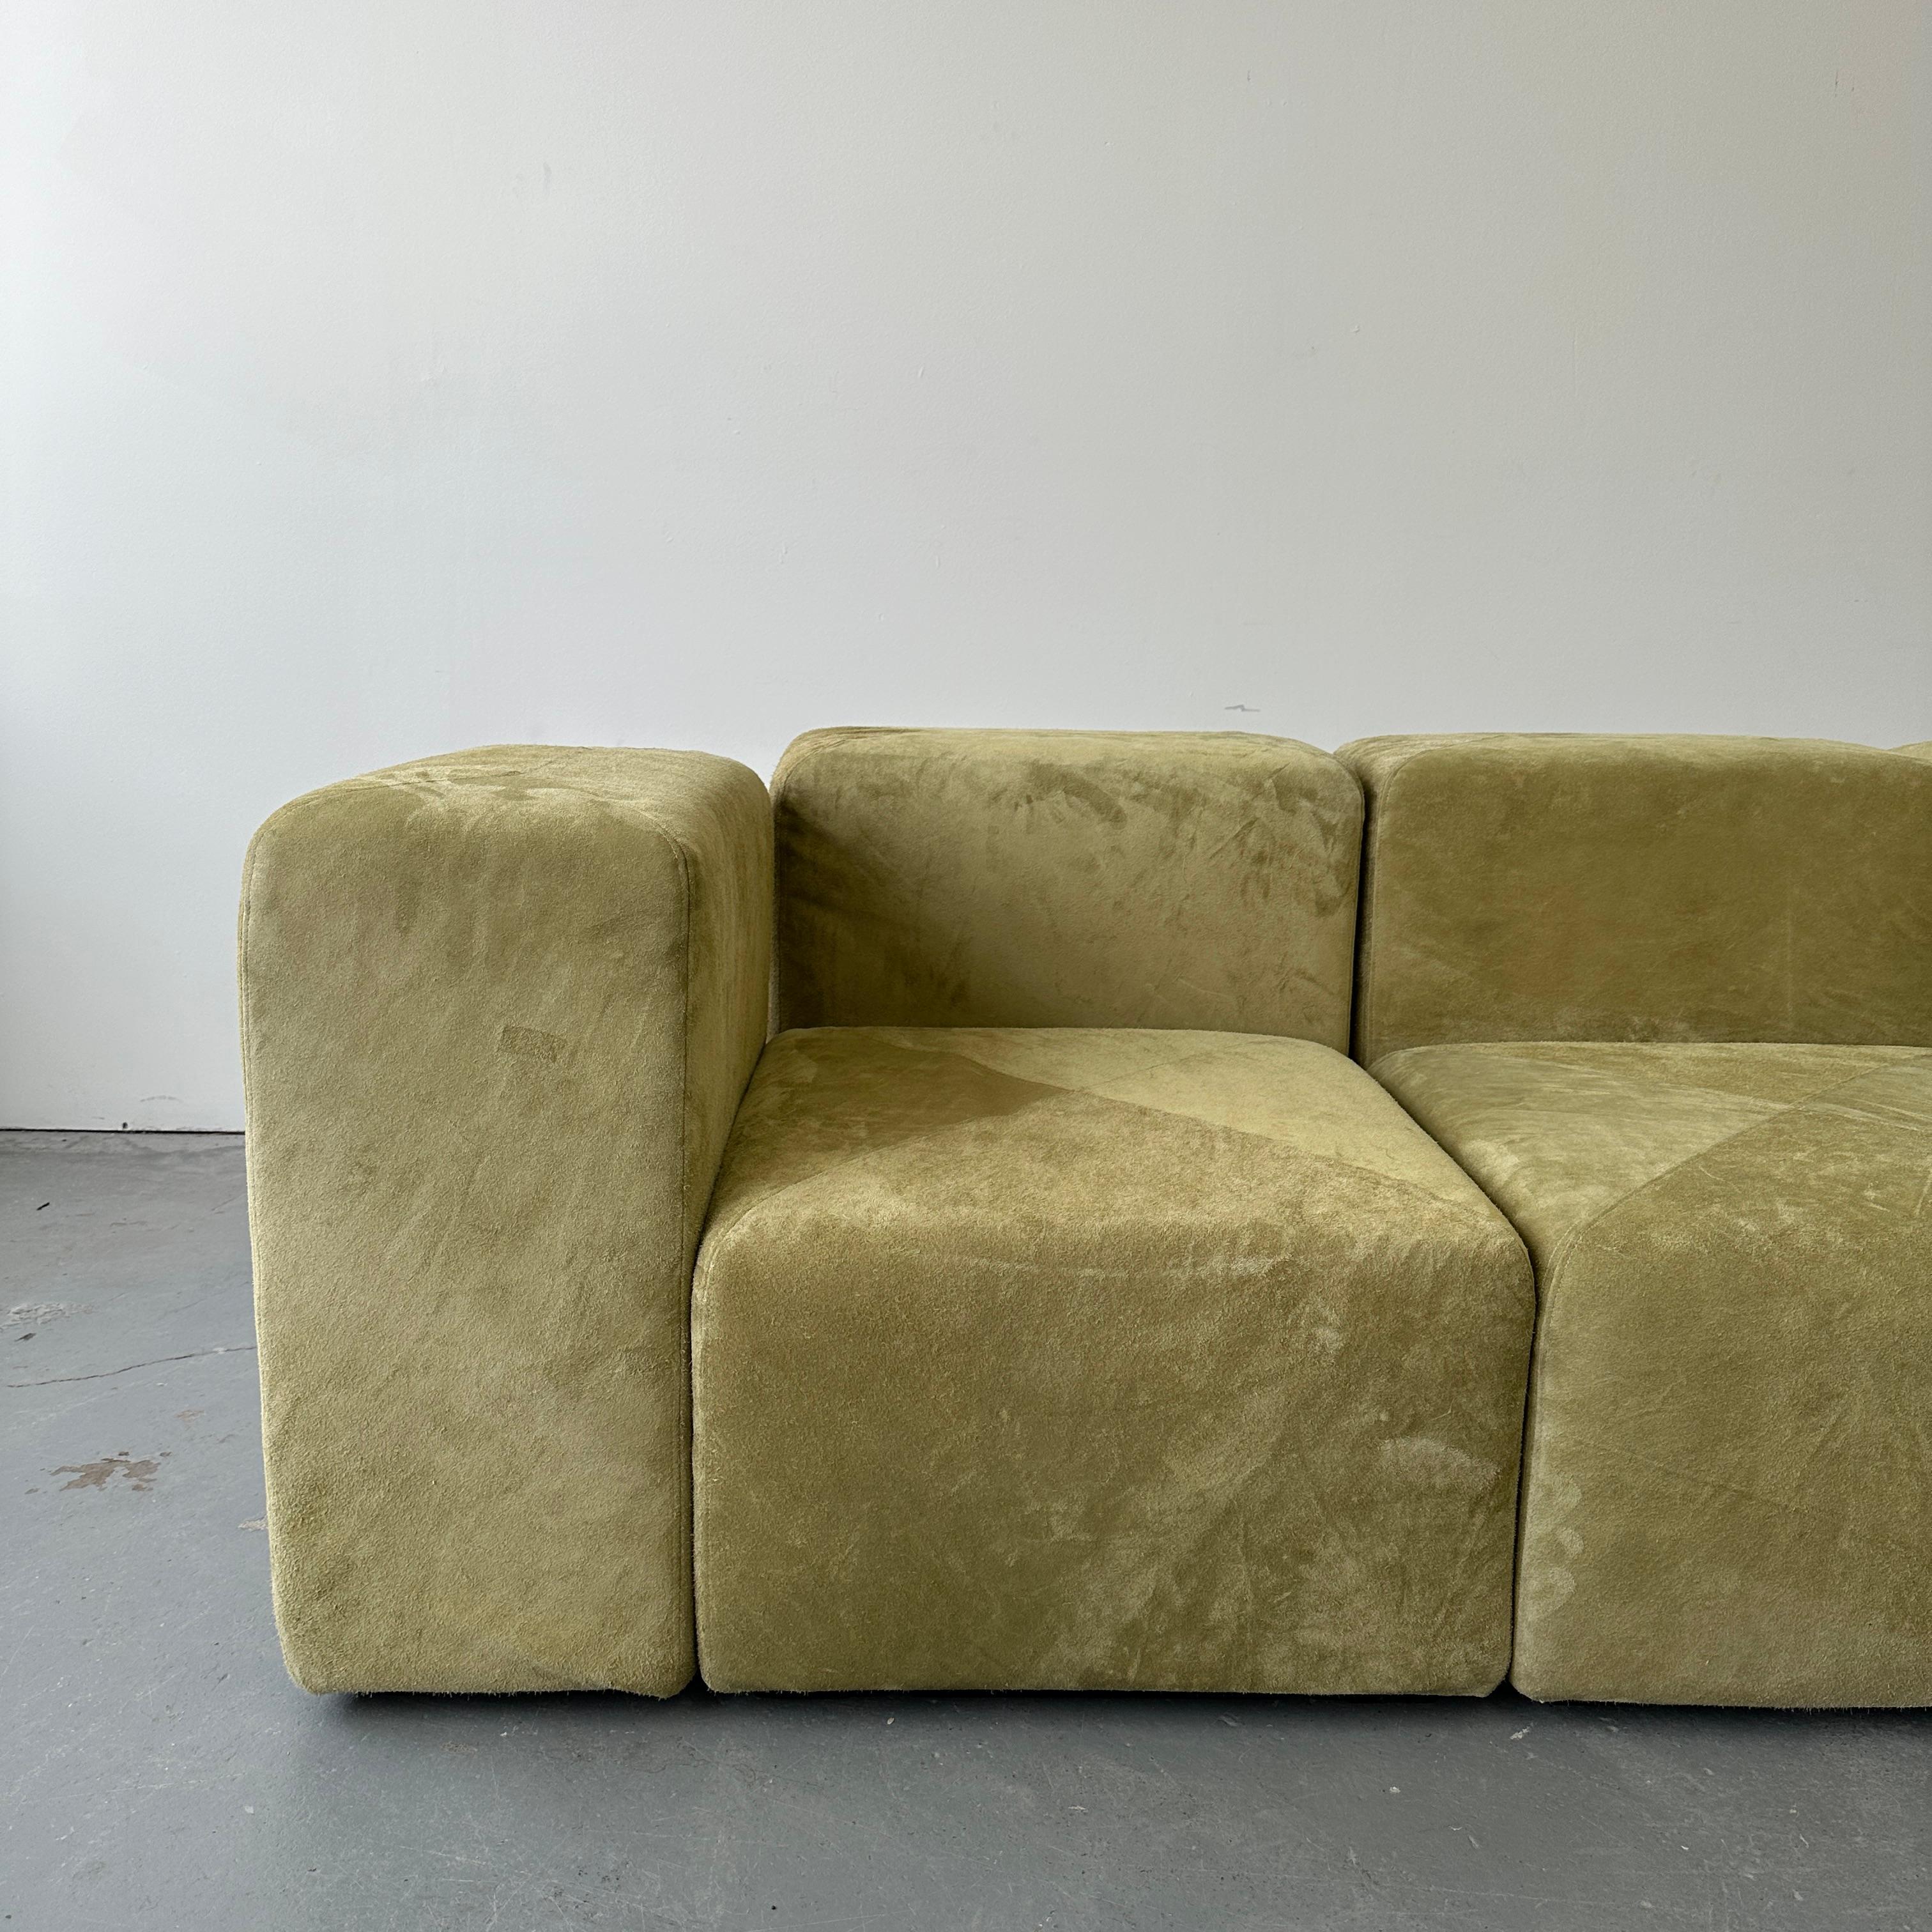 Late 20th Century Sistema 61 Sofa by Giancarlo Piretti in Holly Hunt Suede For Sale